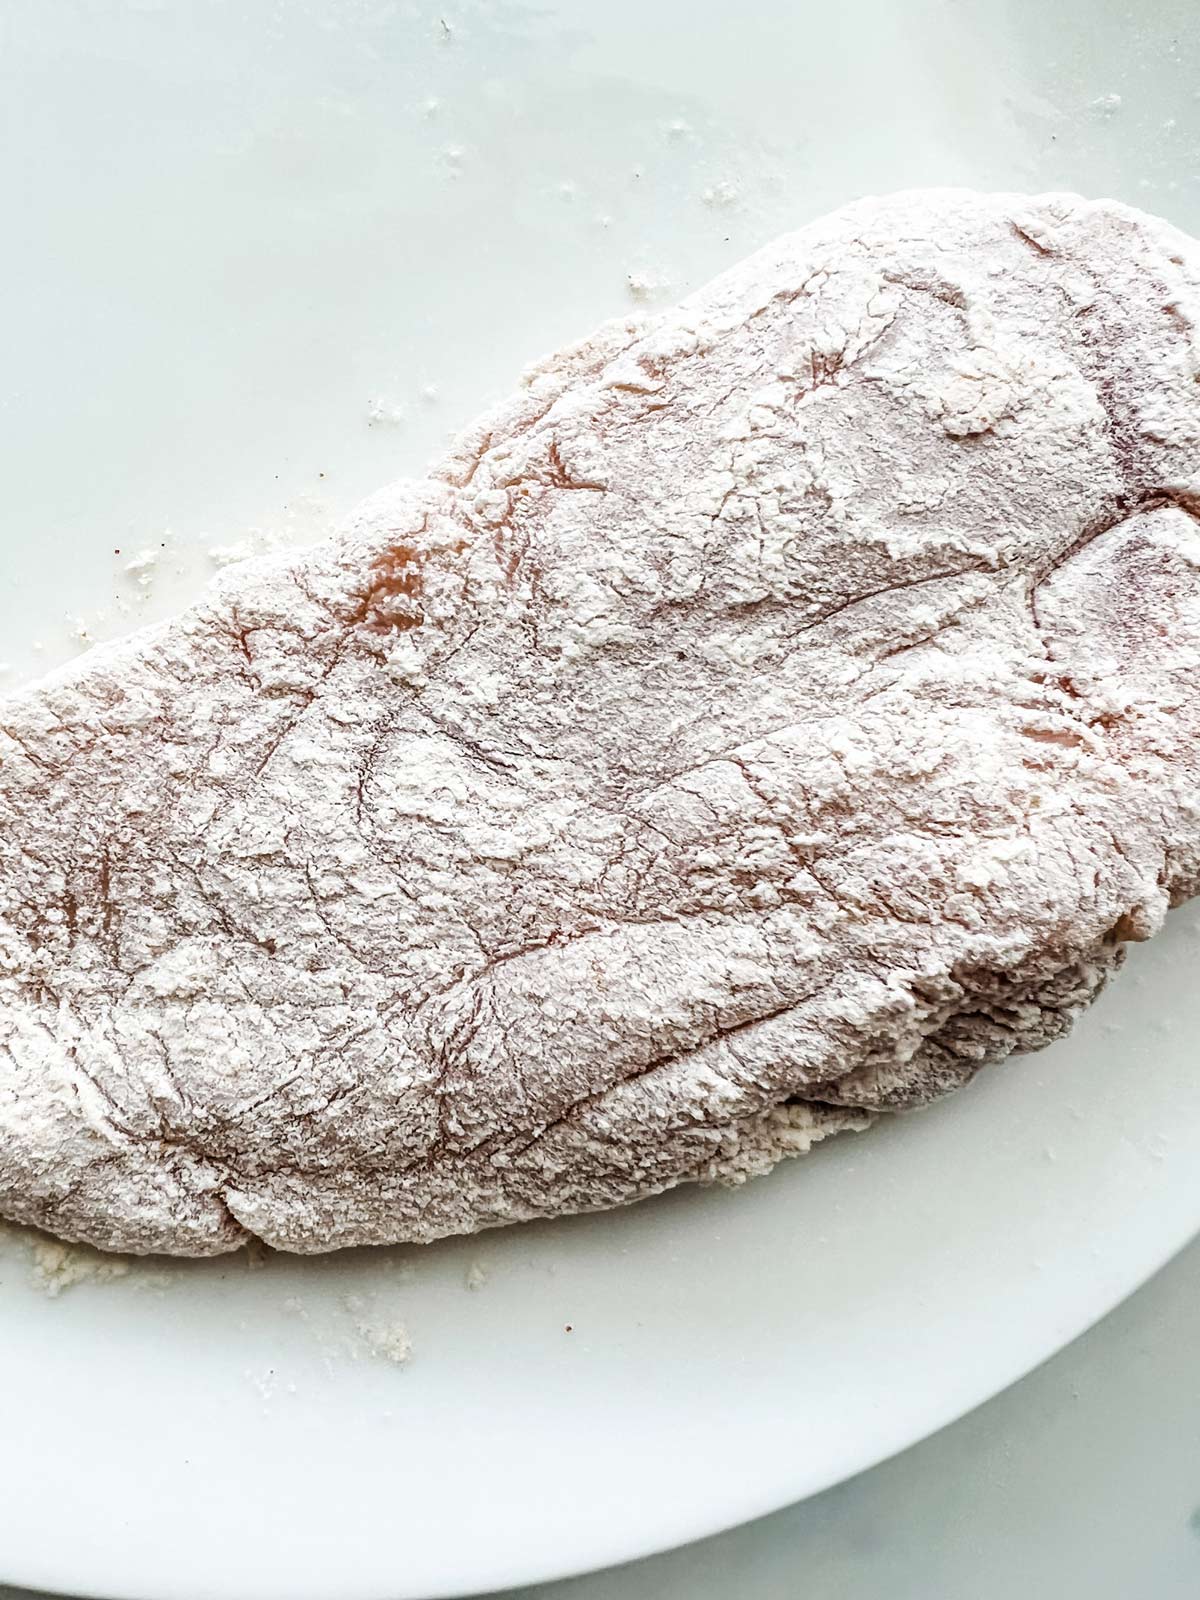 Chicken breast that has been dredged in flour.